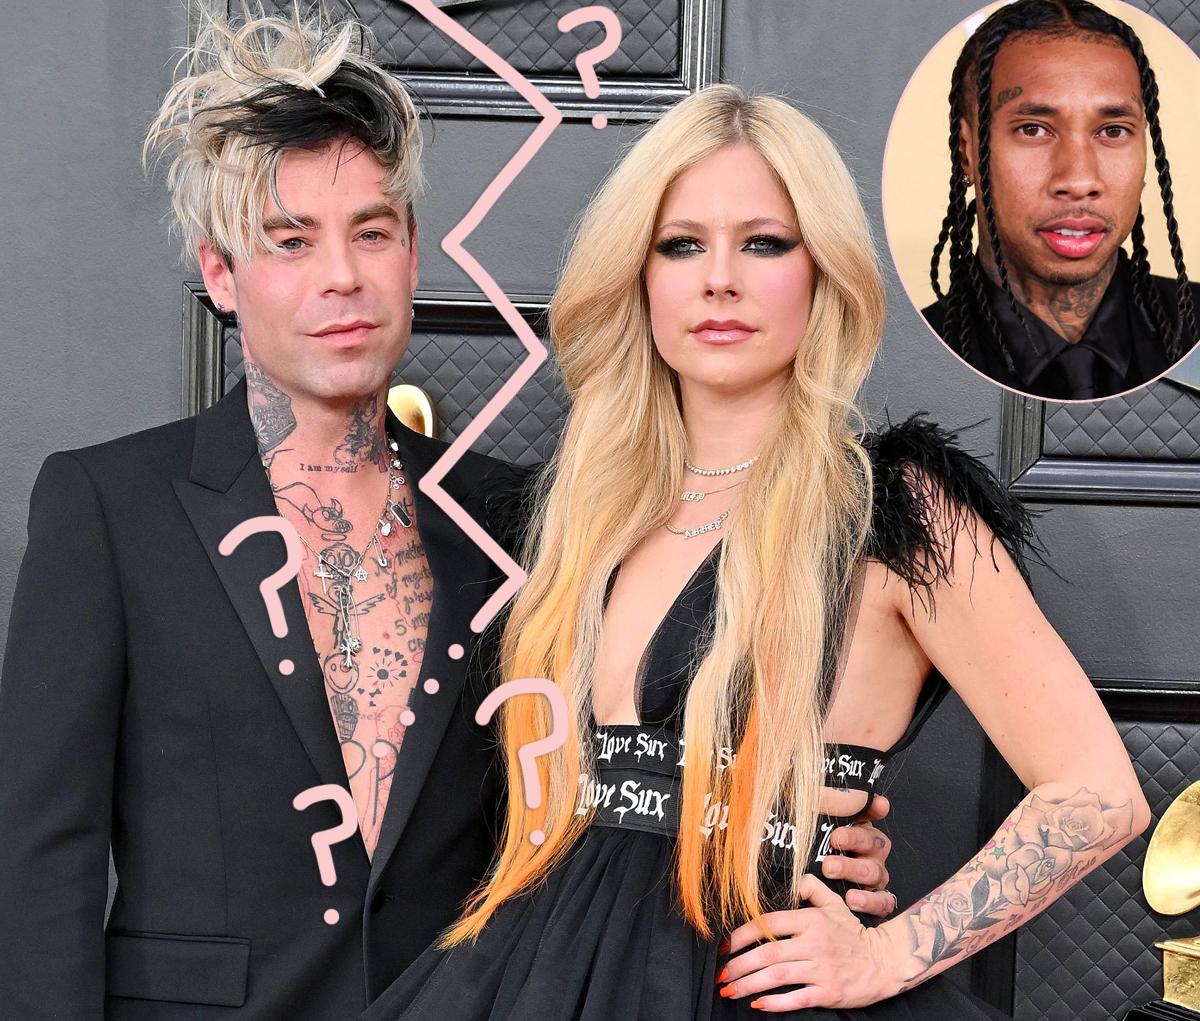 #Avril Lavigne Breaks Off Engagement With Mod Sun — But His Rep Says Split Is ‘News To Him’??